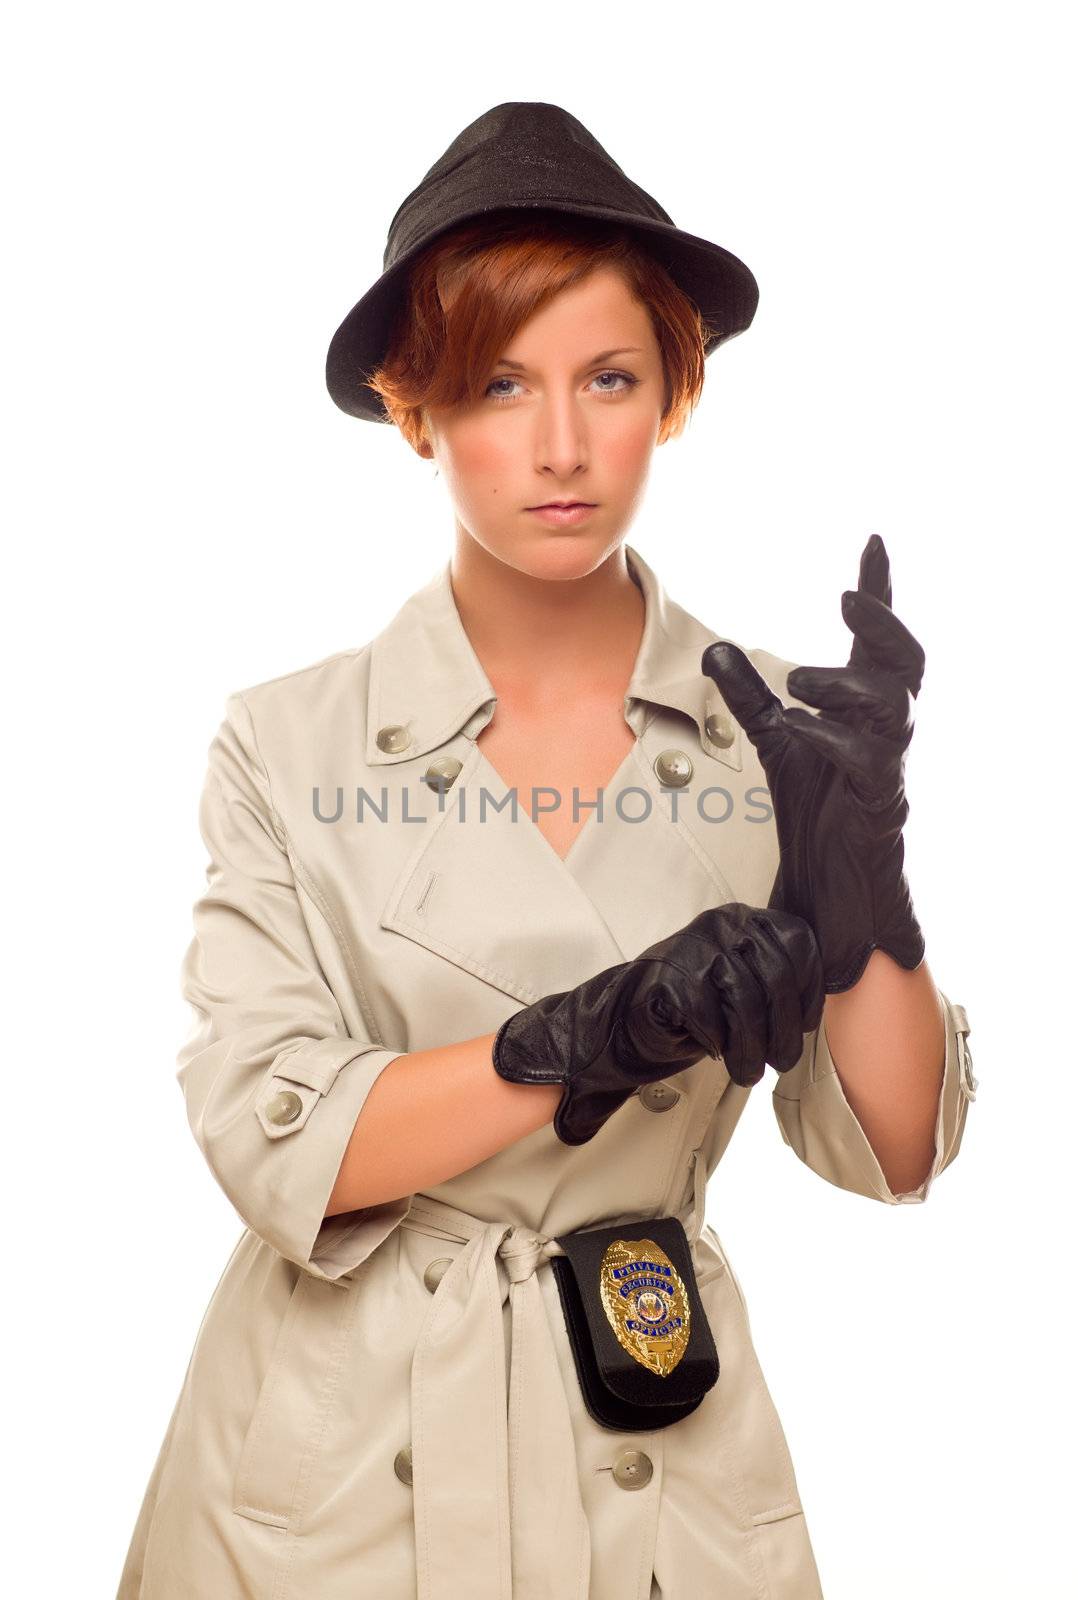 Attractive Female Detective With Badge and Leather Gloves In Trench Coat Isolated on a White Background.